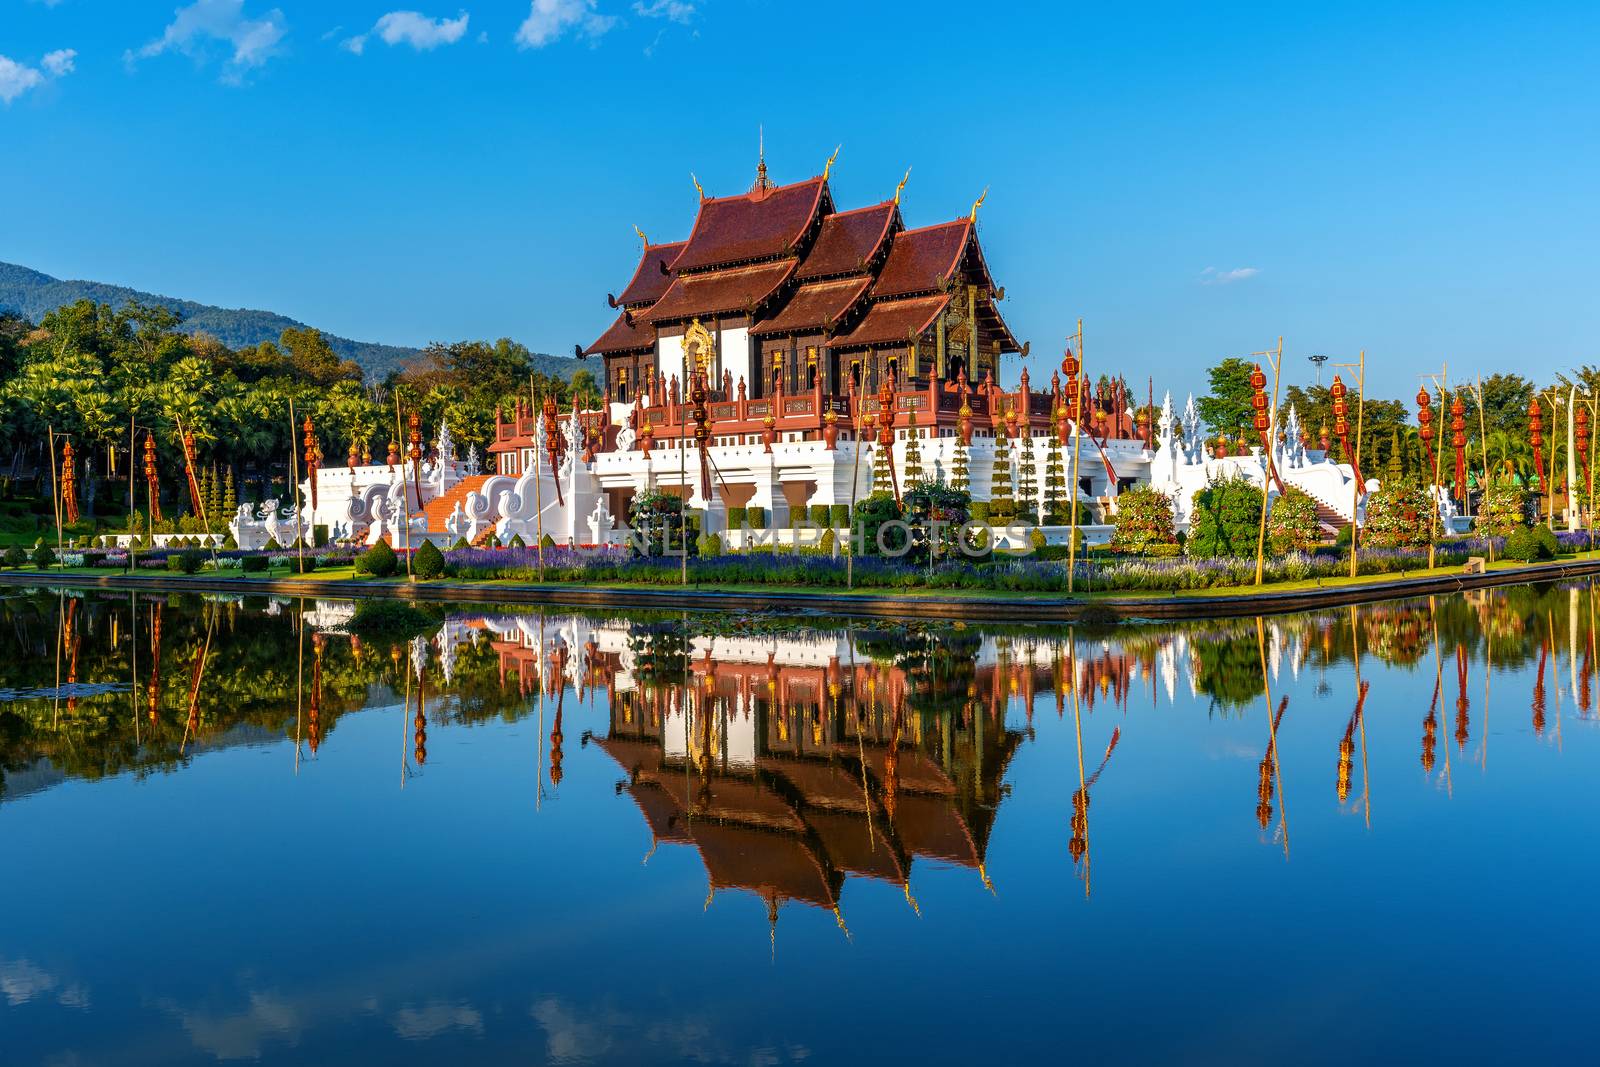 Ho kham luang northern thai style in Royal Flora ratchaphruek in Chiang Mai,Thailand. by gutarphotoghaphy